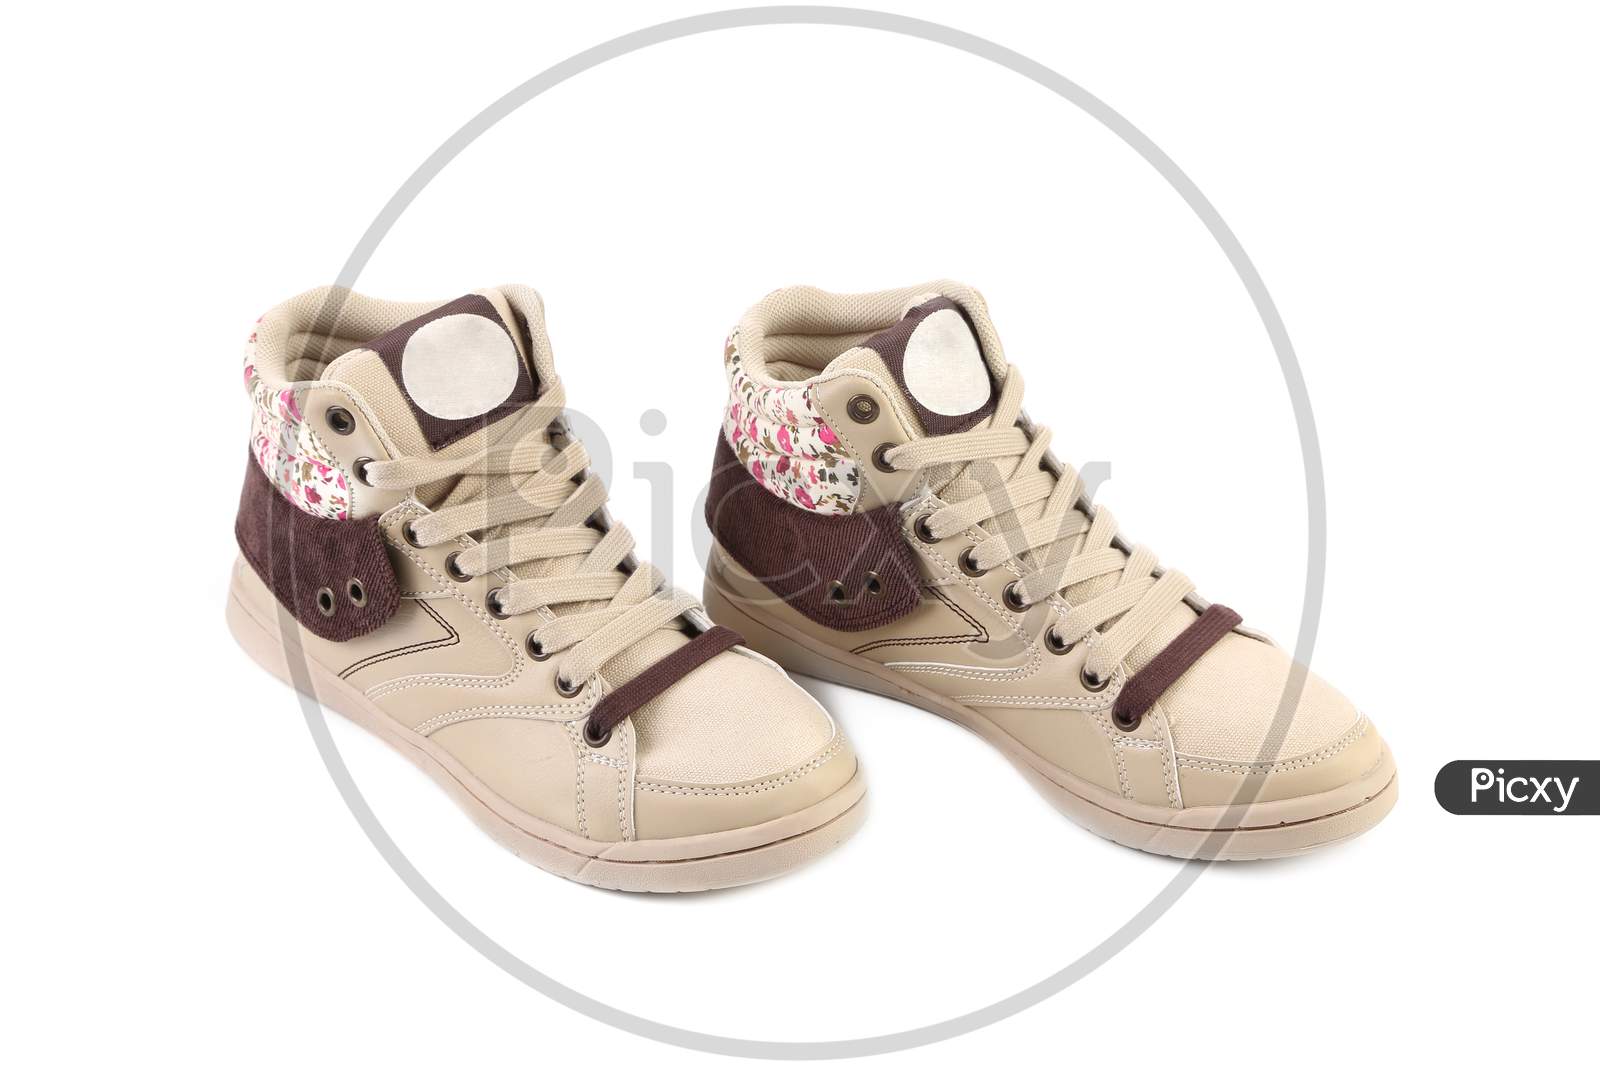 White Modern Shoes For Girls. Isolated On A White Background.